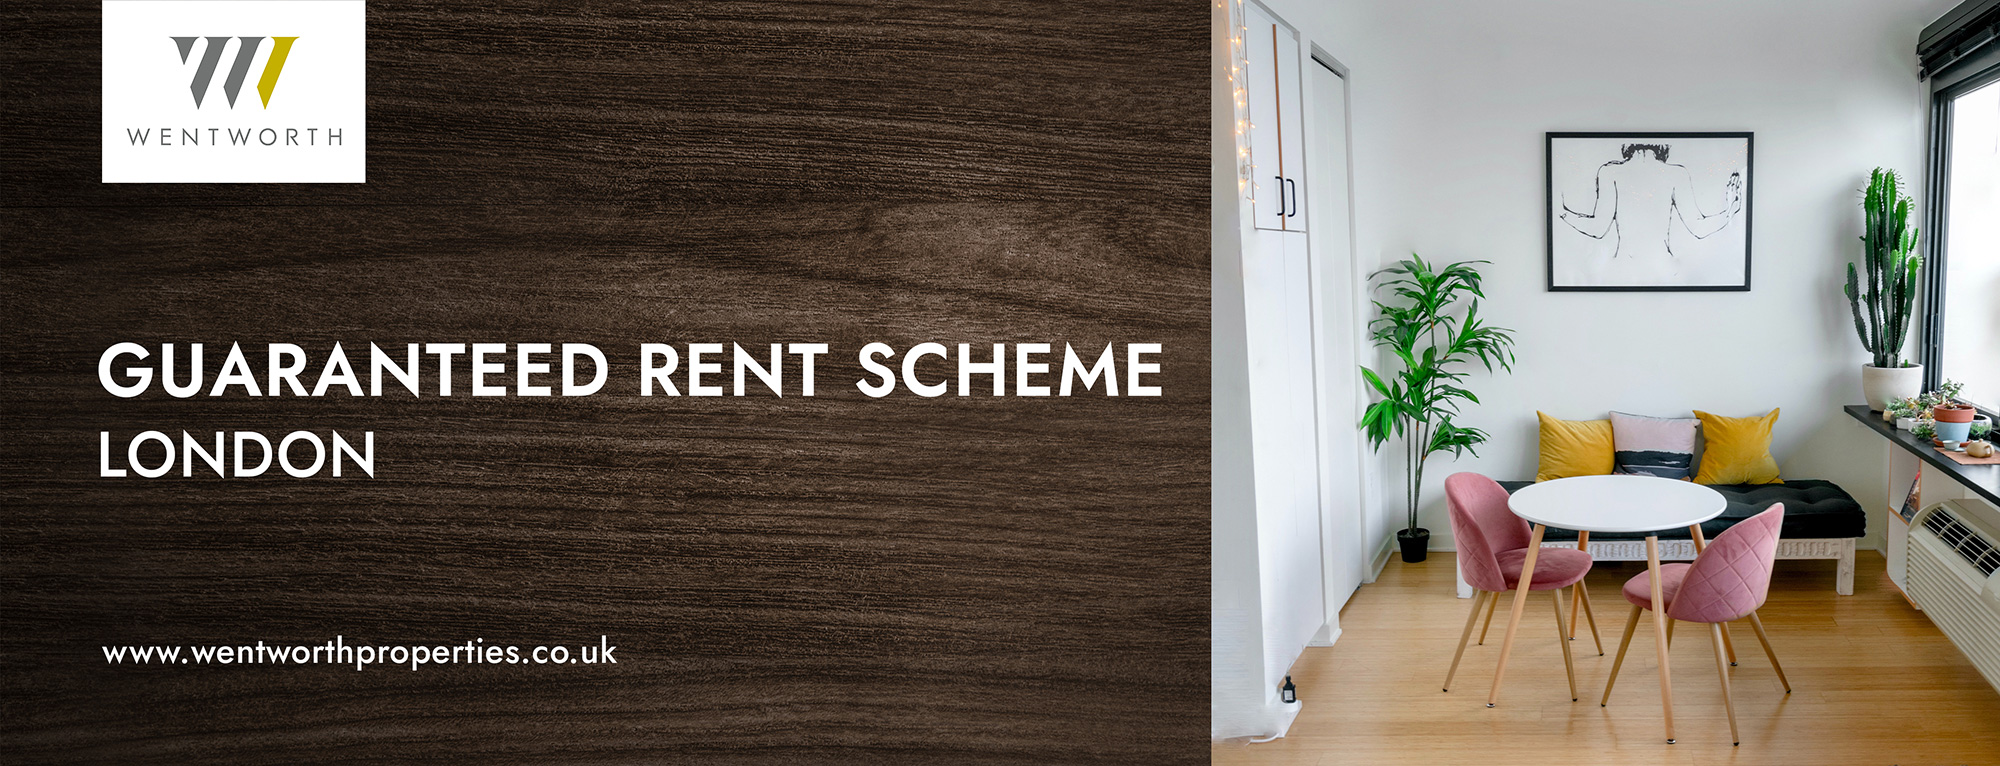 Guaranteed rent schemes in London